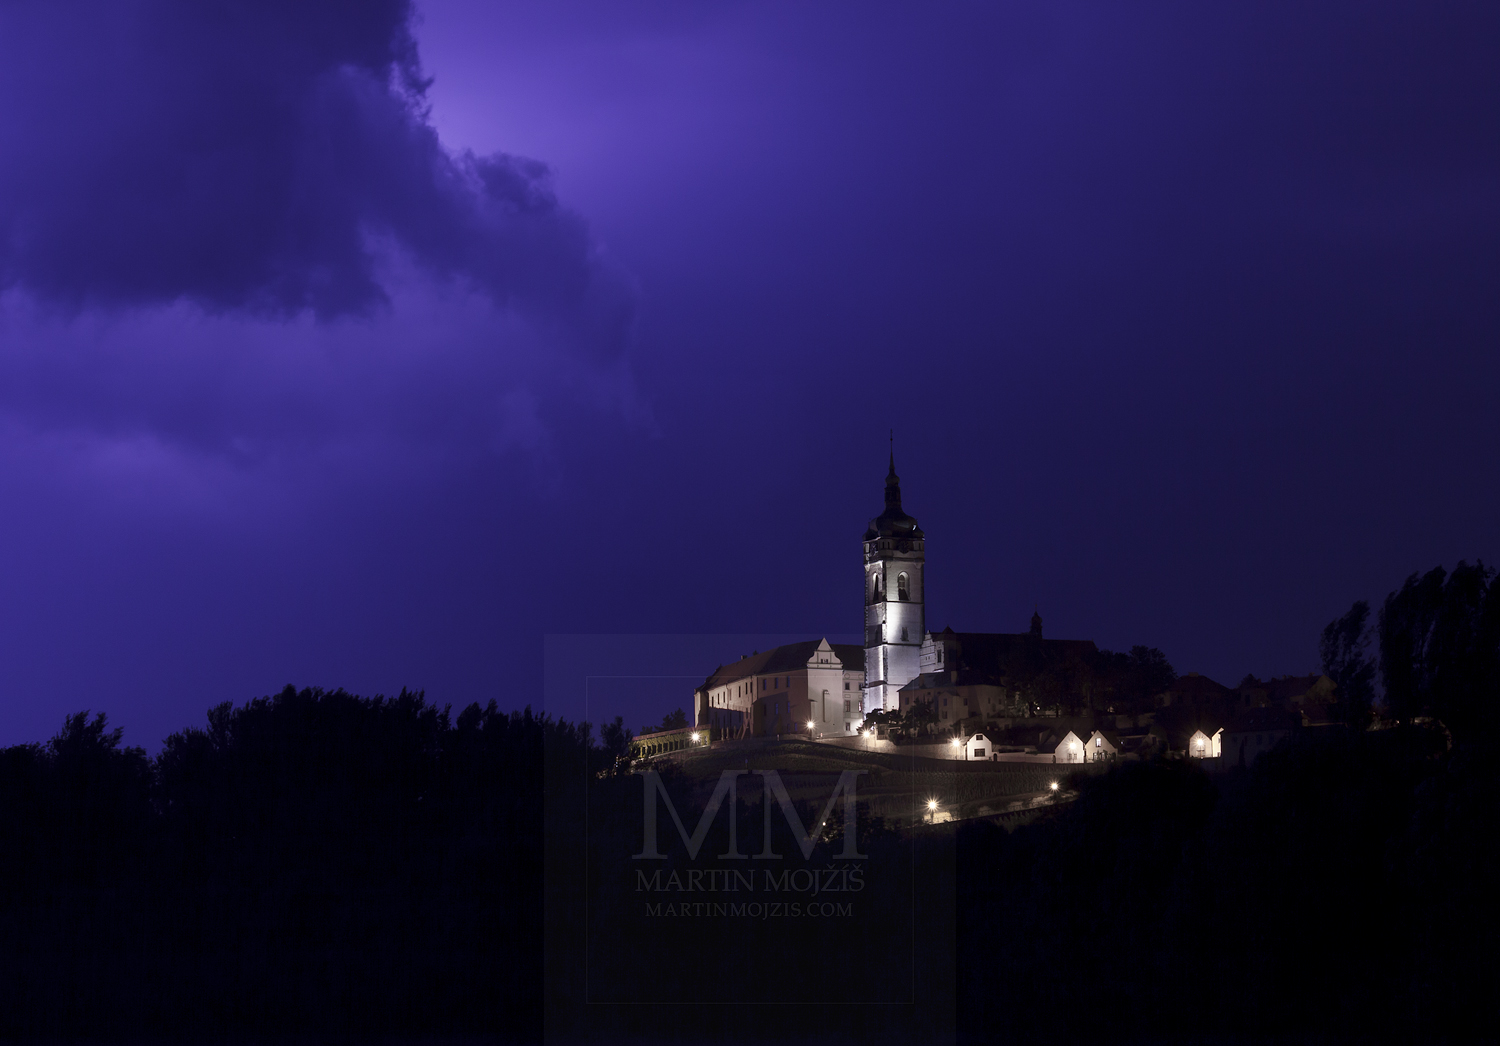 Melnik Chateau and Church in the storm. Photograph © Martin Mojzis.